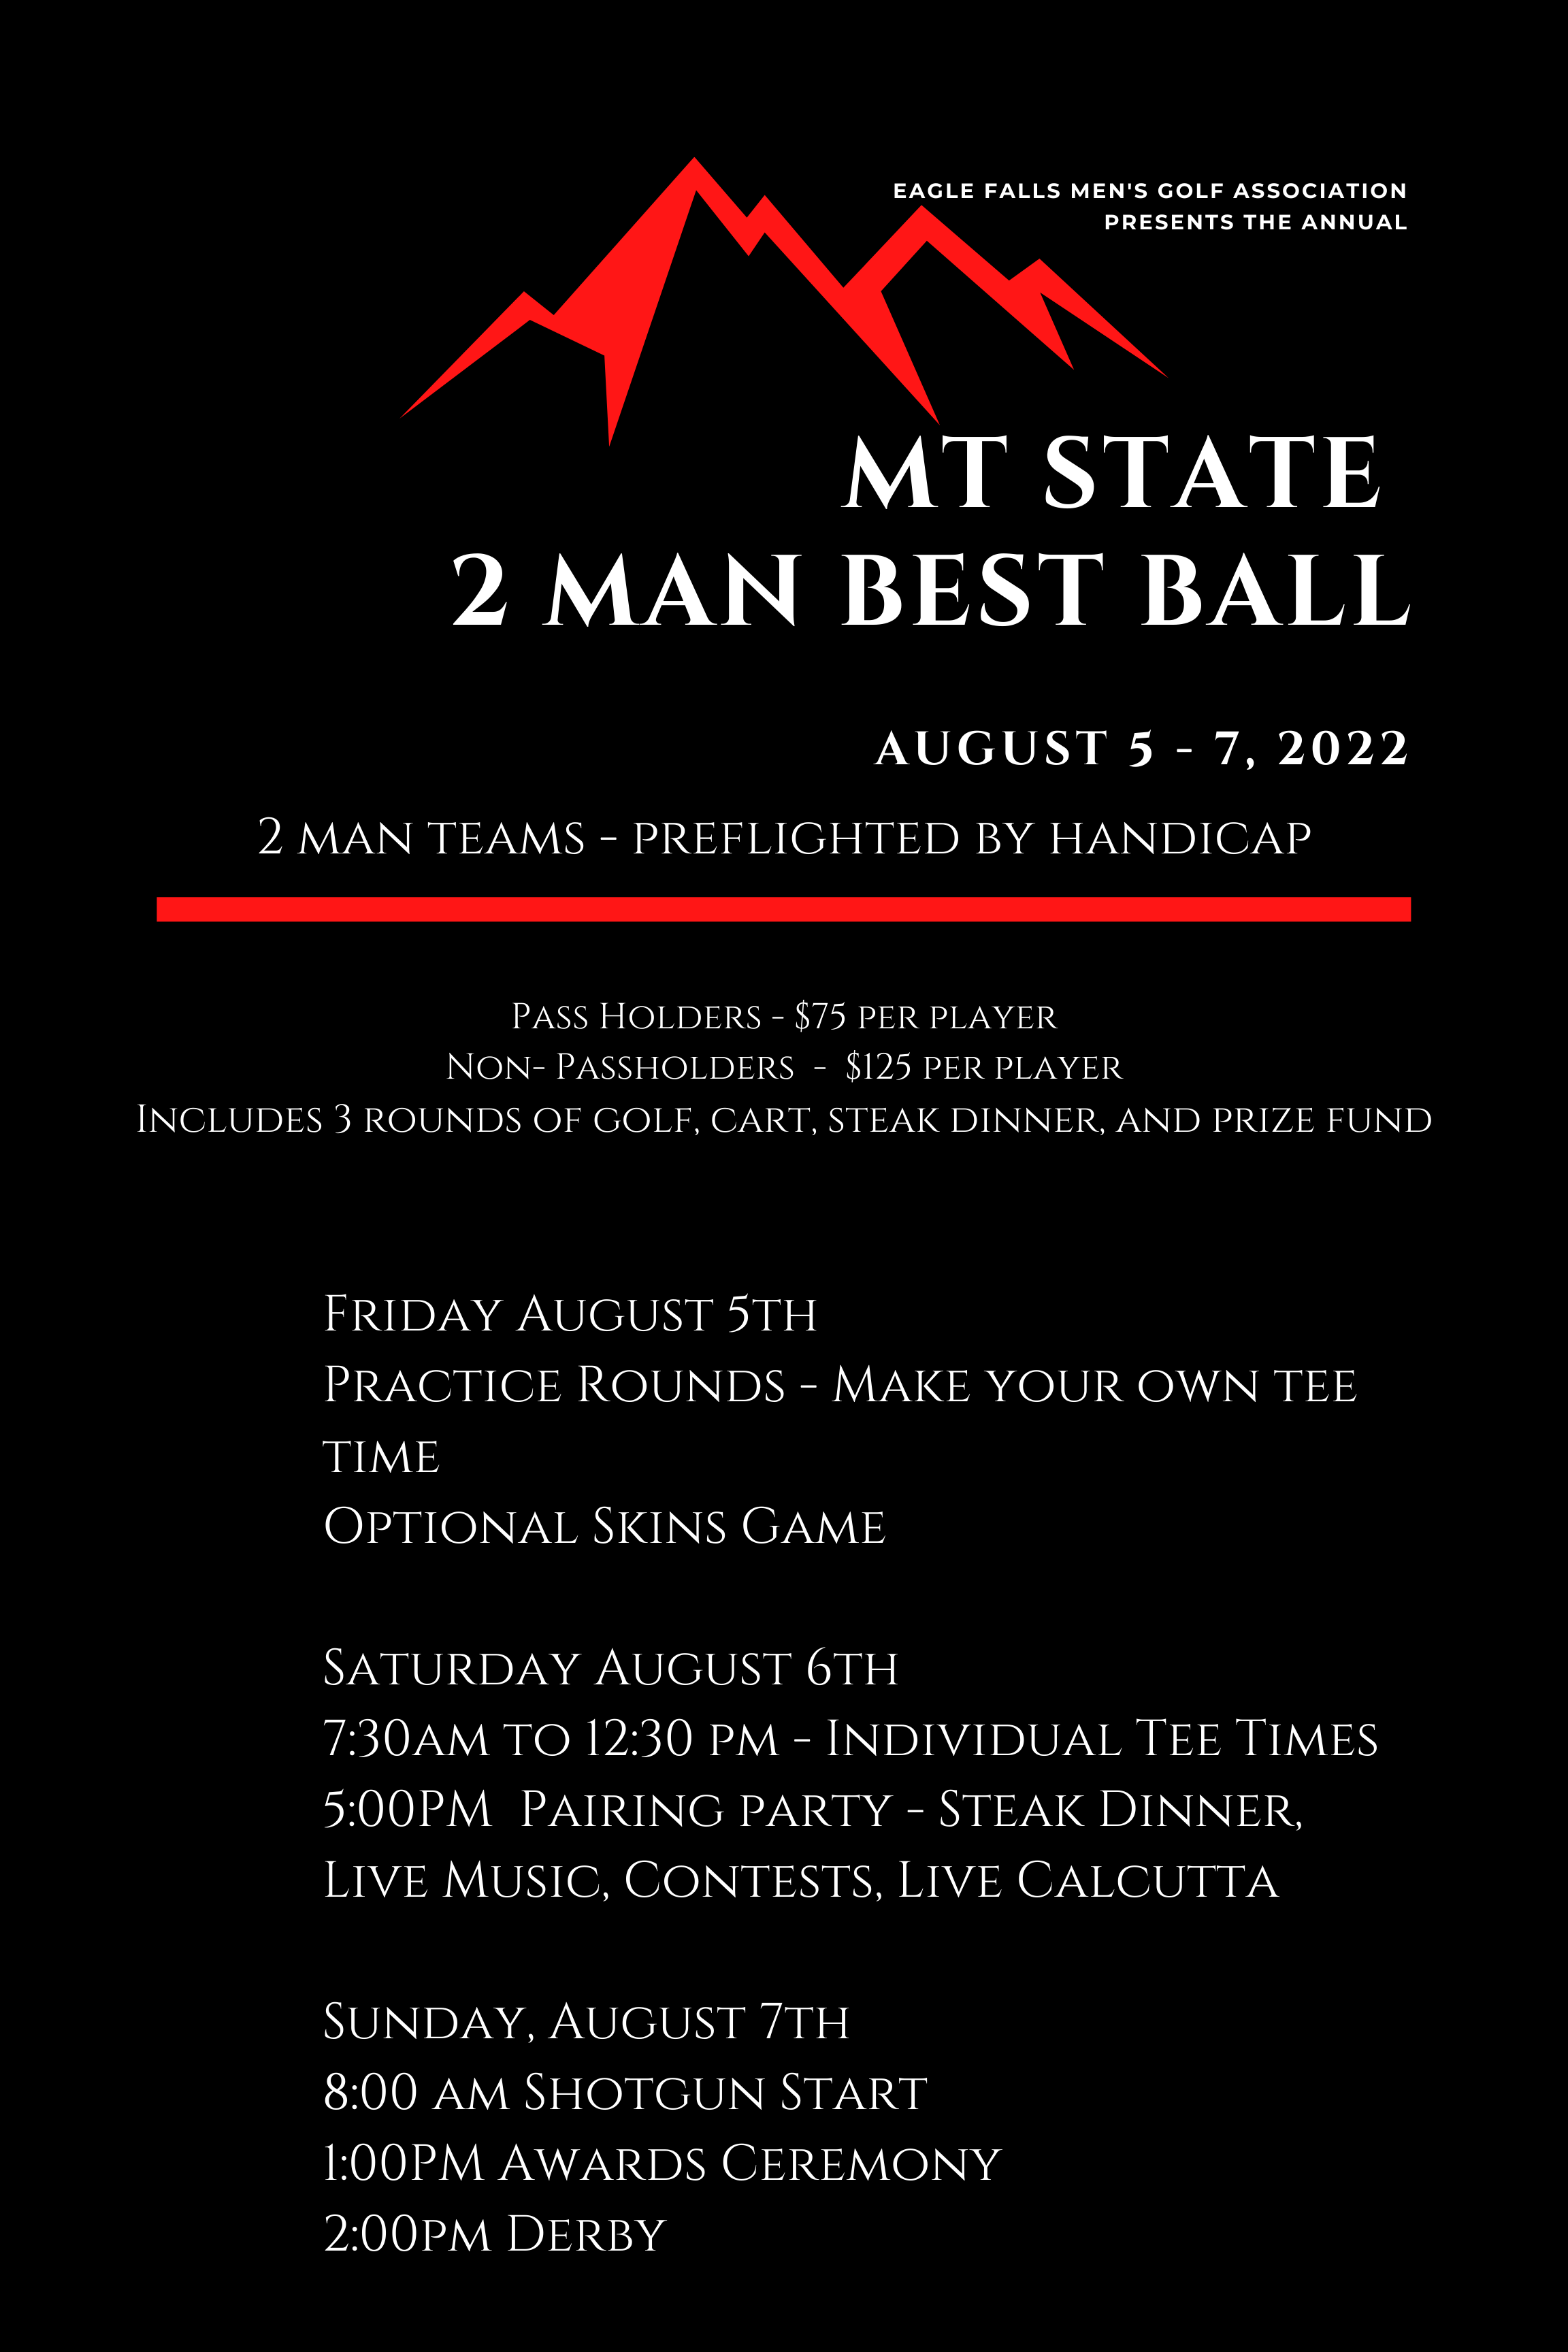 EAGLE FALLS MEN'S GOLF ASSOCIATION PRESENTS THE ANNUAL MT STATE 2 MAN BEST BALL AUGUST 5 - 7, 2022 2 MAN TEAMS - PREFLIGHTED BY HANDICAP PASS HOLDERS - $75 PER PLAYER NON-PASSHOLDERS - $125 PER PLAYER INCLUDES 3 ROUNDS OF GOLF, CART, STEAK DINNER, AND PRIZE FUND  FRIDAY AUGUST 5TH PRACTICE ROUNDS - MAKE YOUR OWN TEE TIME OPTIONAL SKINS GAME SATURDAY AUGUST 6TH 7:30AM TO 12:30 PM - INDIVIDUAL TEE TIMES 5:00PM PAIRING PARTY - STEAK DINNER, LIVE MUSIC, CONTESTS, LIVE CALCUTTA  SUNDAY, AUGUST 7TH 8:00 AM SHOTGUN START 1:00PM AWARDS CEREMONY 2:00PM DERBY